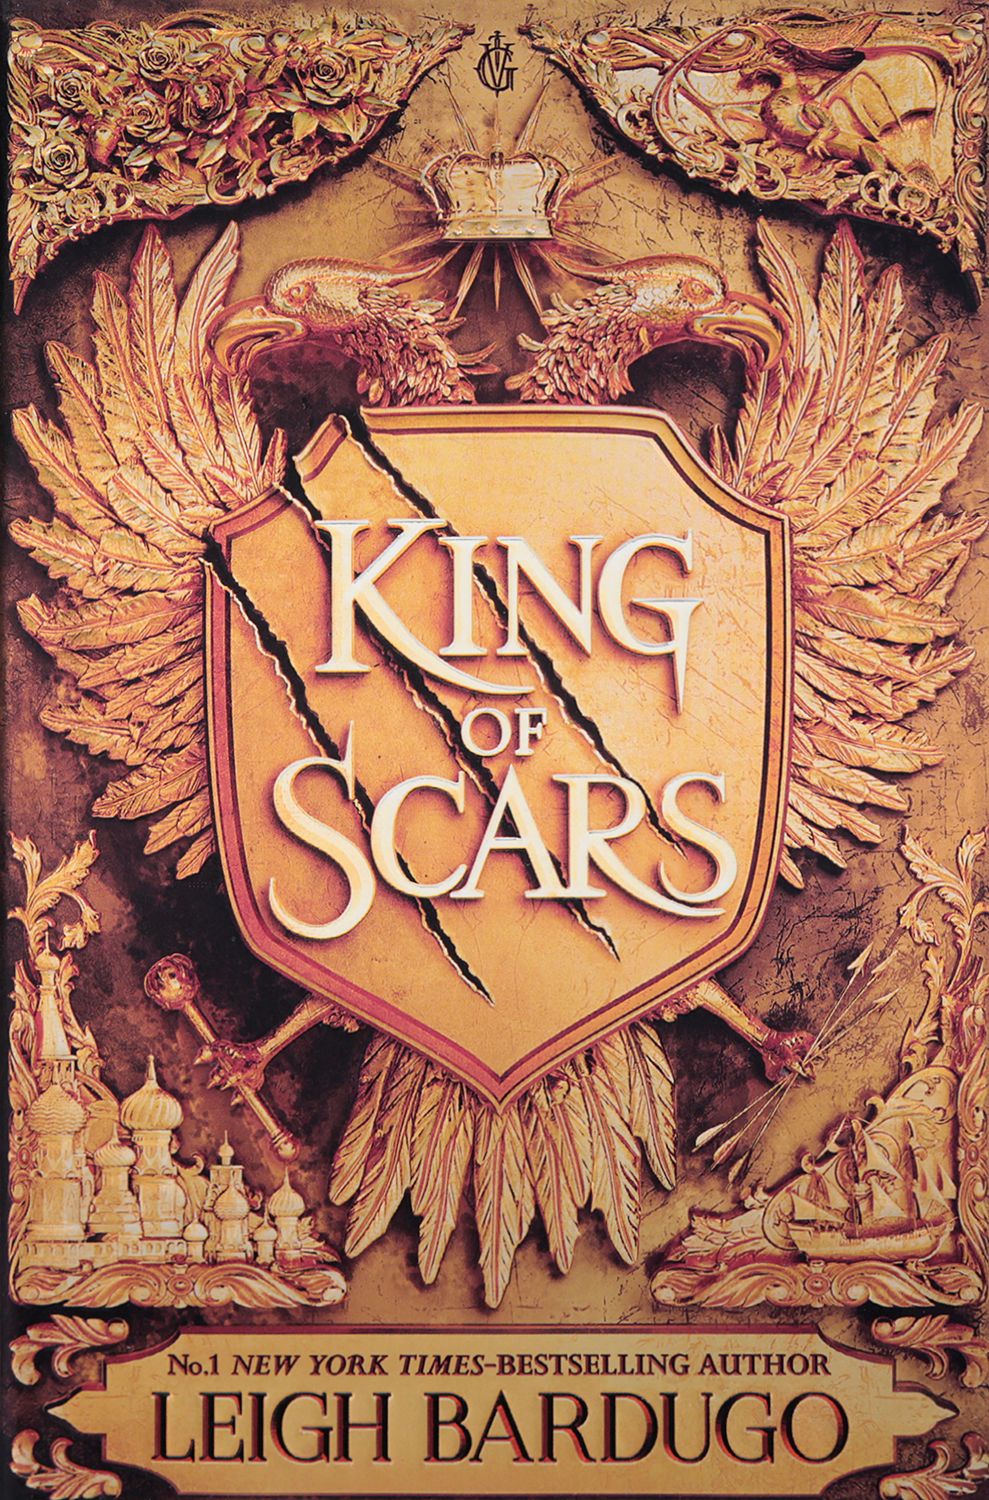 king of scars series book 2